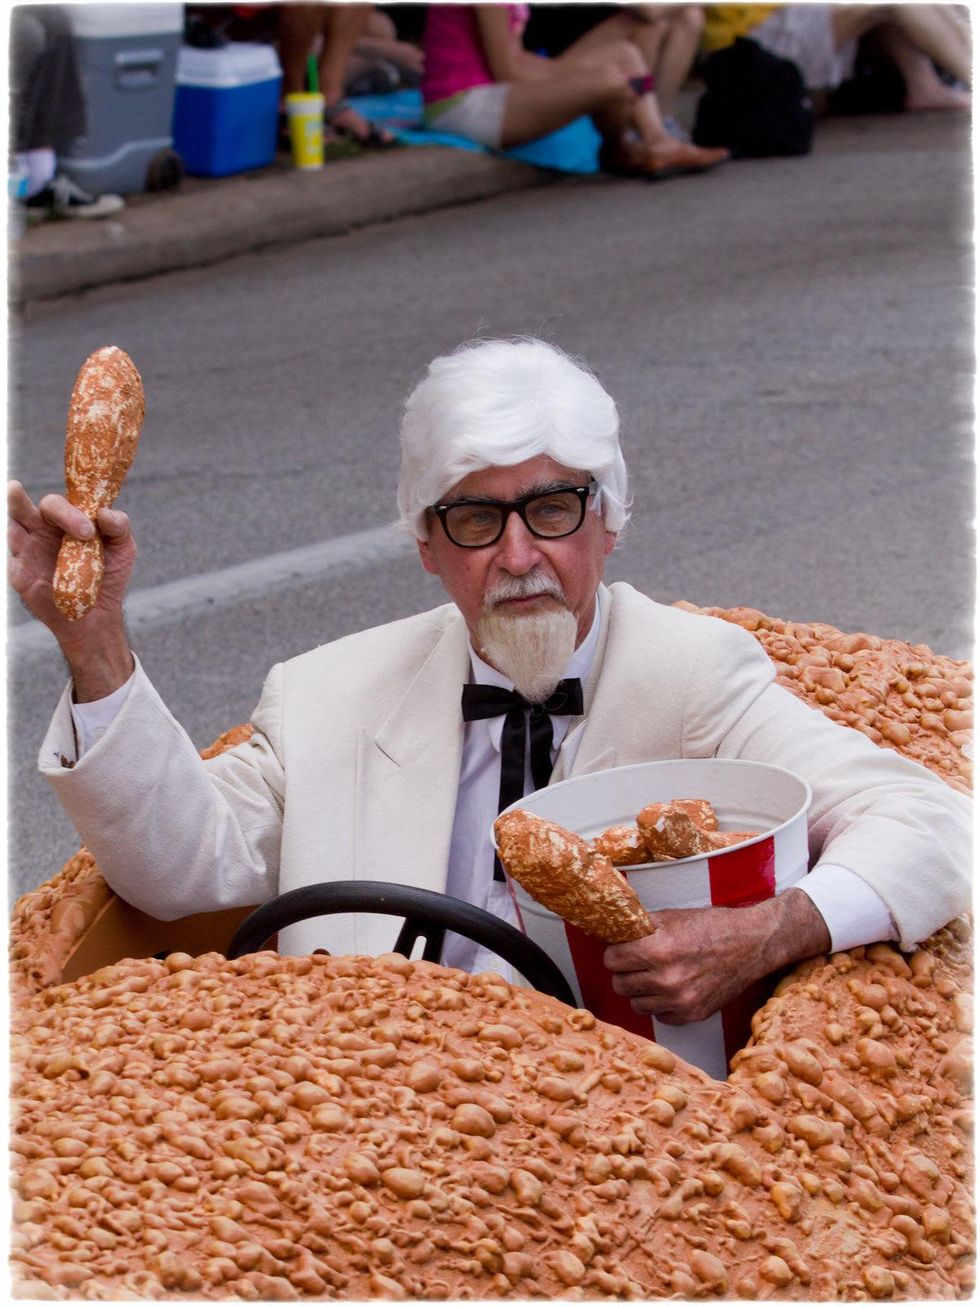 News_Art Car Parade_Kentucky Fried Chicken_Colonel Sanders_May 2012